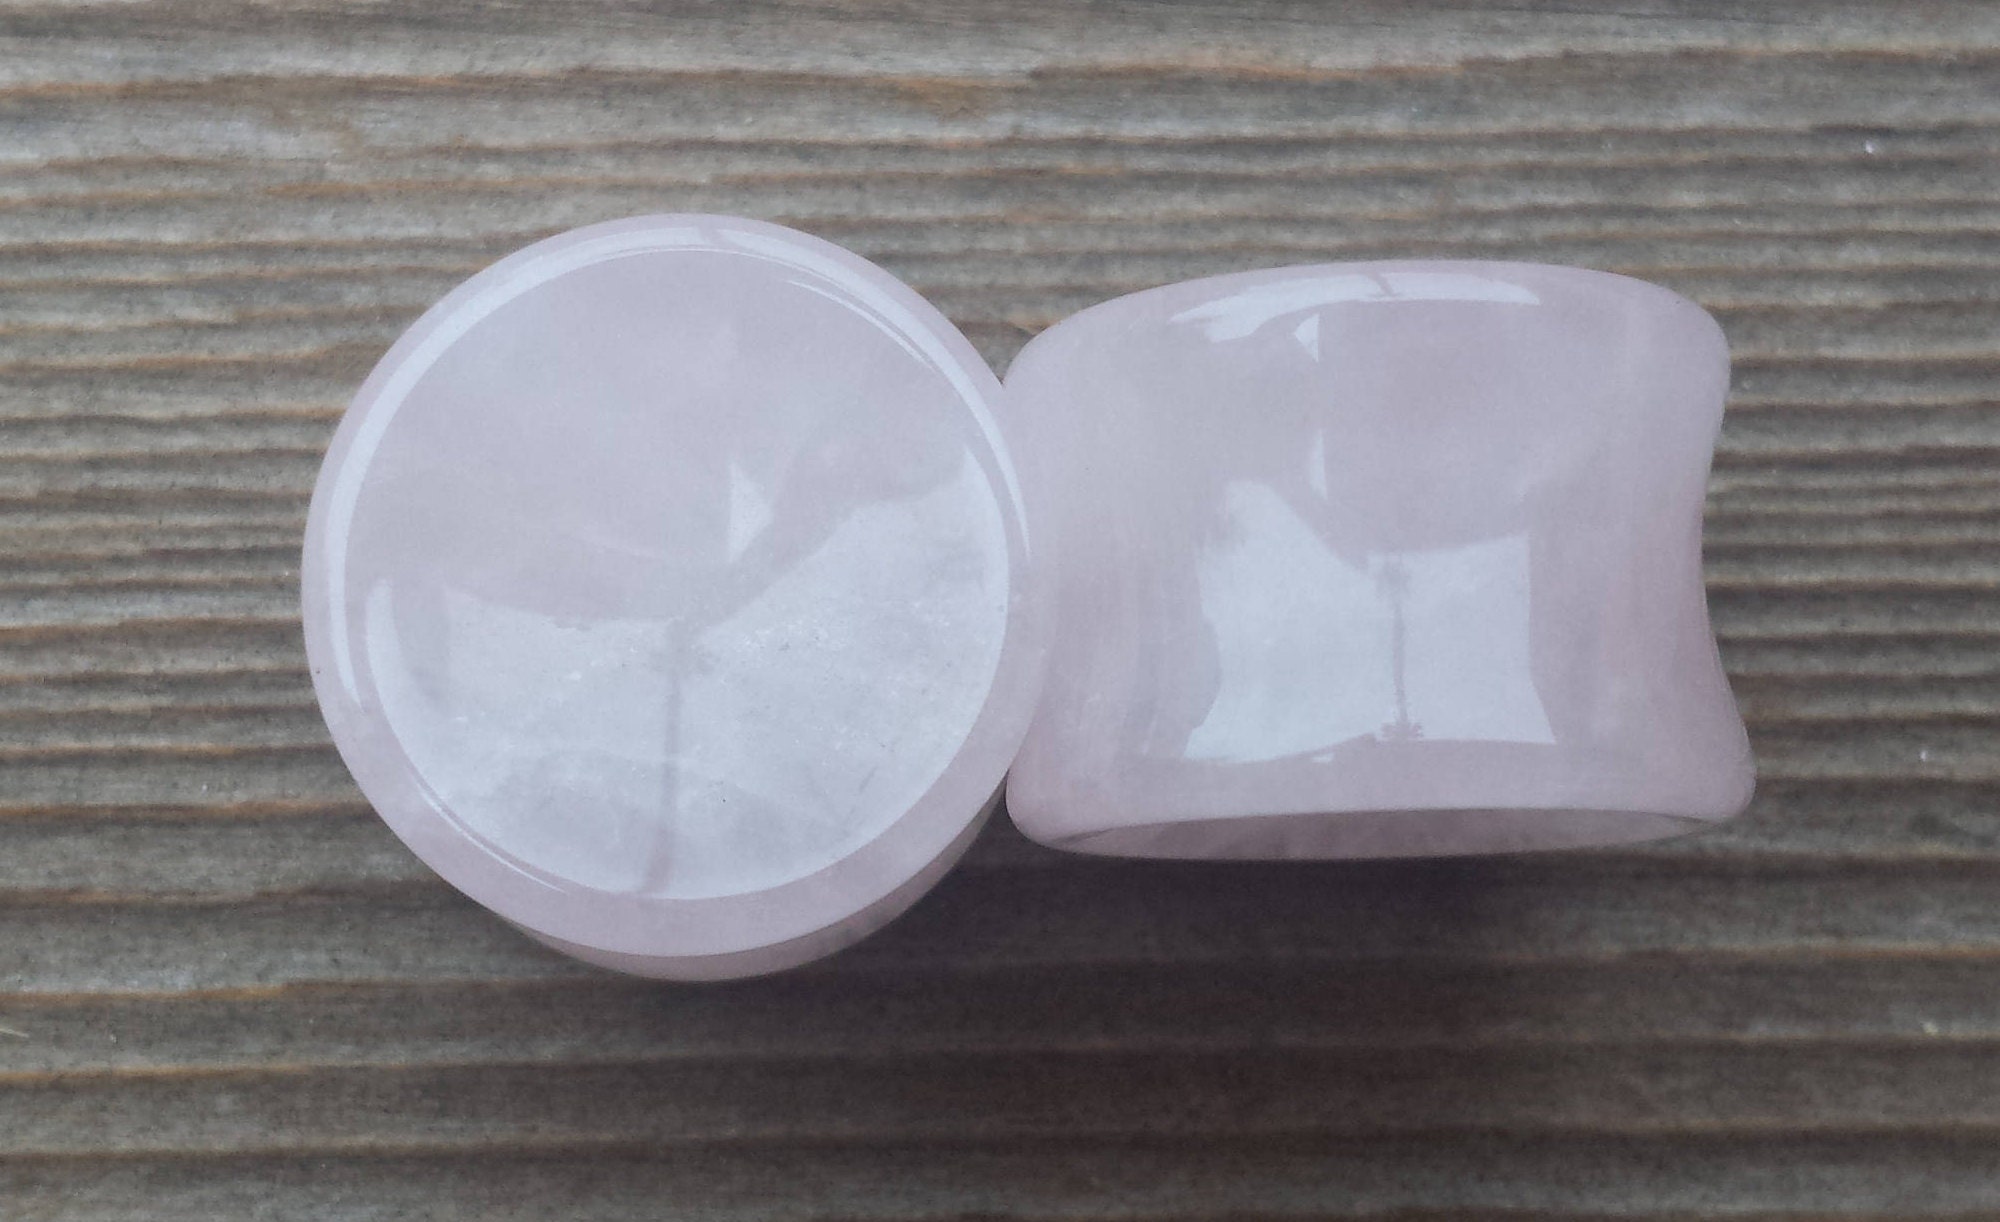 Pick Size Pair of Real CONCAVE ROSE QUARTZ  Plugs Gauges Body Jewelry Double Flared